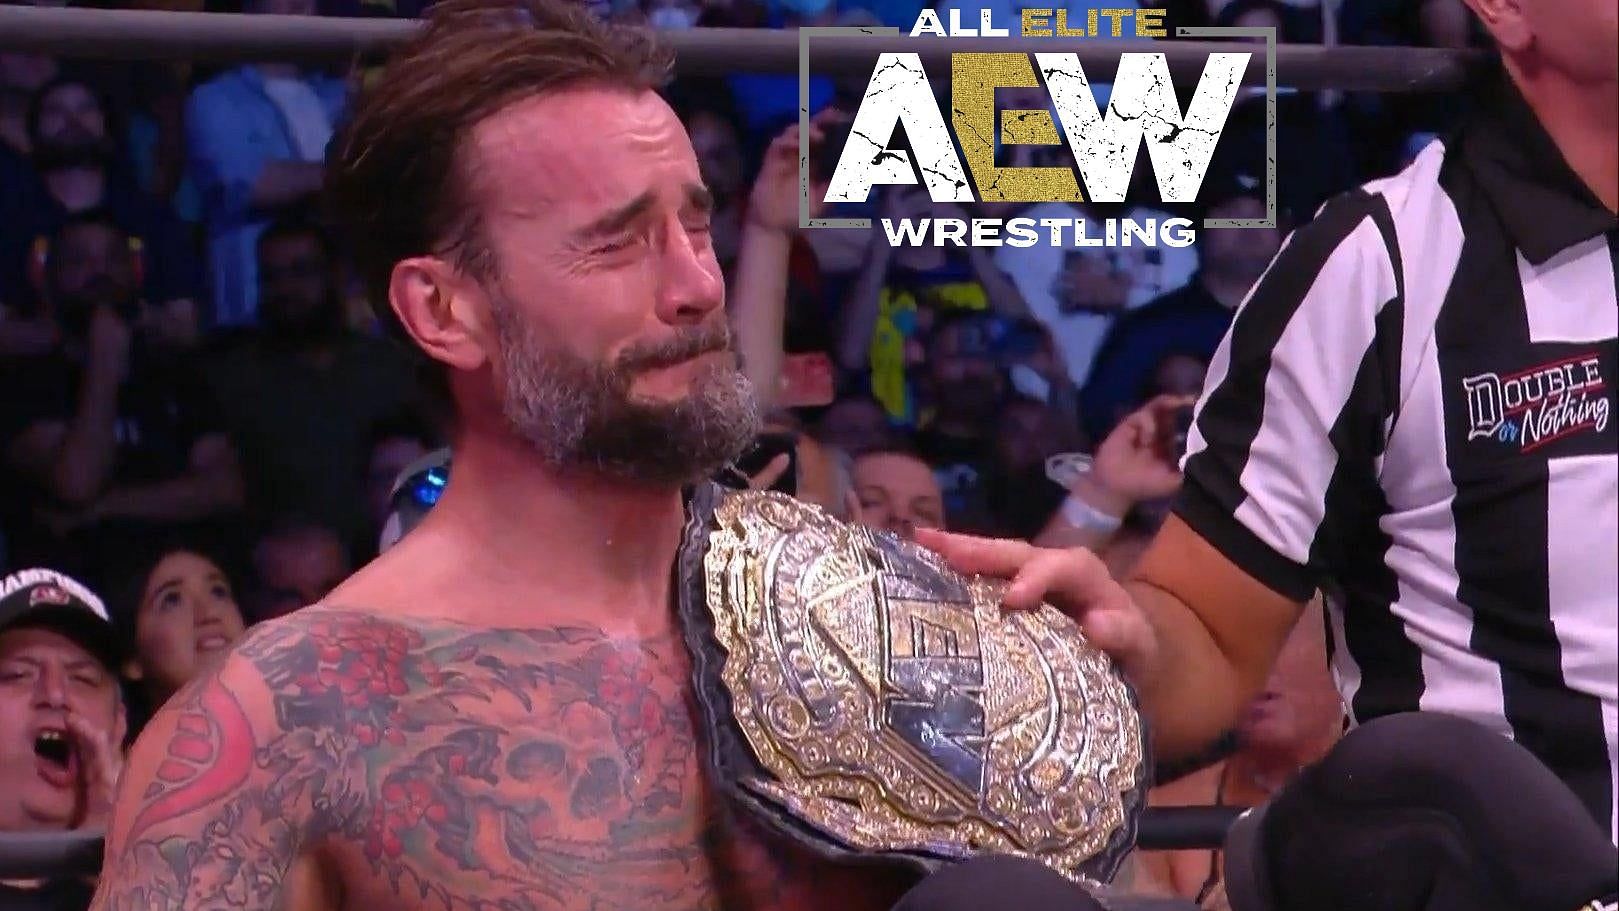 Was Punk able to salvage his career within AEW?